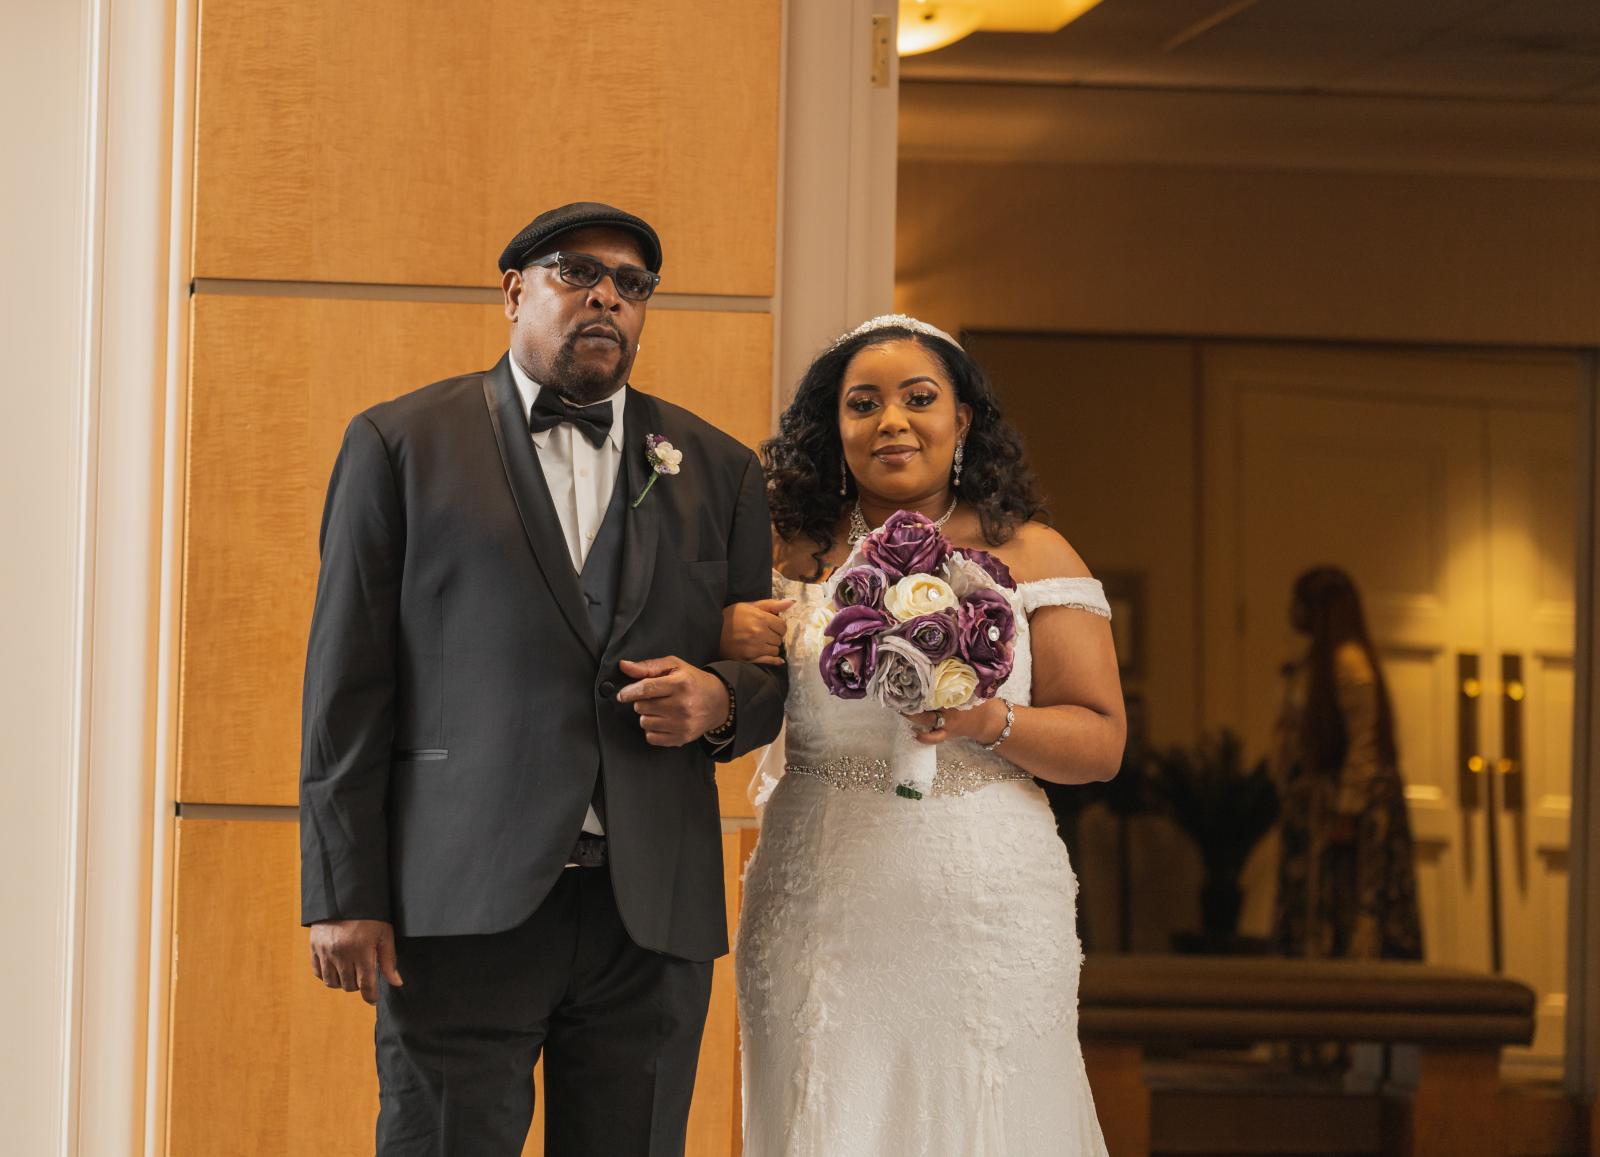 Bride and father, bridal march, bridal processional, beautiful African American bride, African American wedding, romantic wedding ceremony at Hilton Akron/Fairlawn